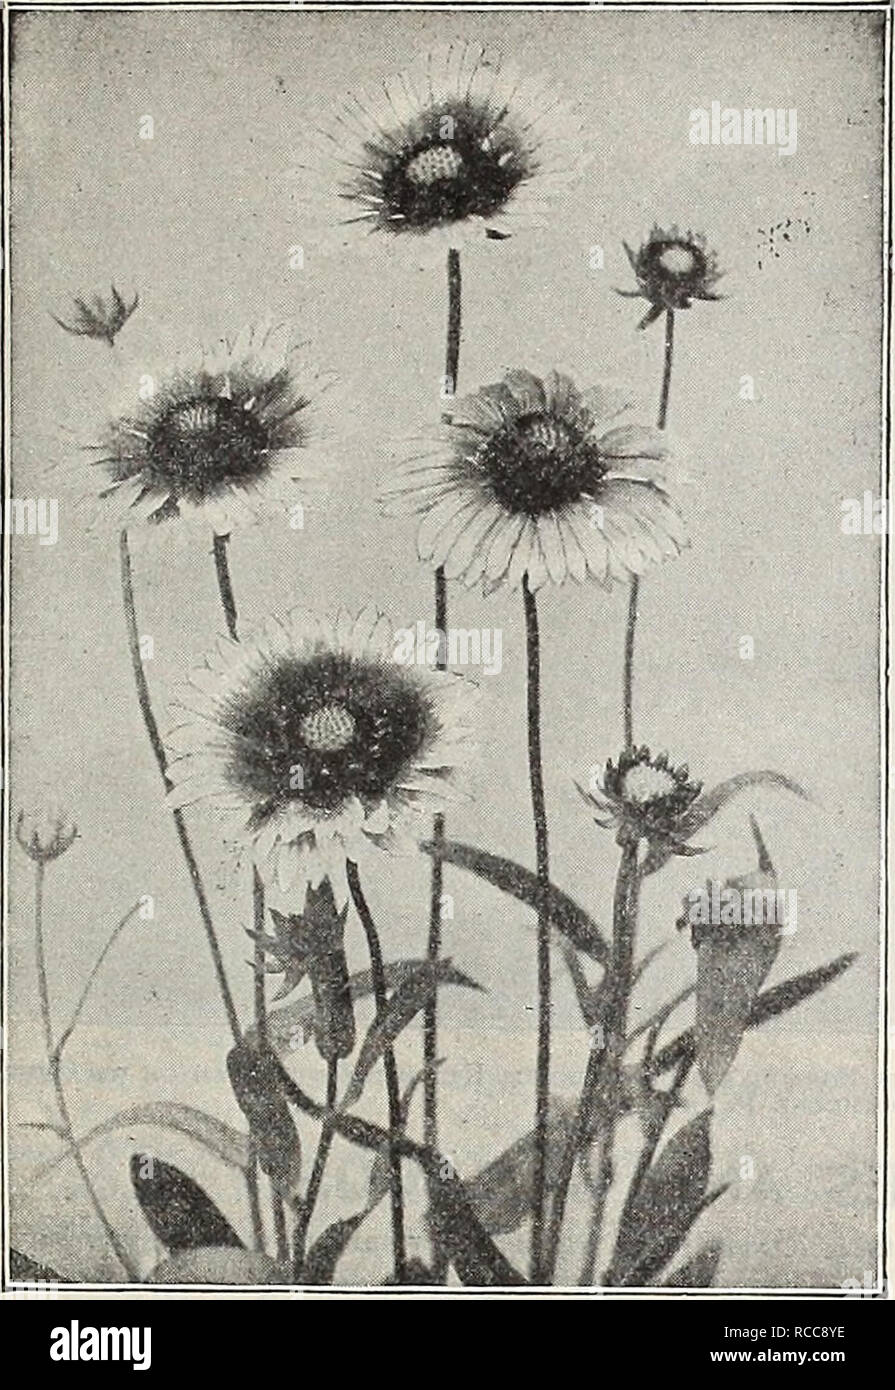 . Dreer's 1907 garden book. Seeds Catalogs; Nursery stock Catalogs; Gardening Equipment and supplies Catalogs; Flowers Seeds Catalogs; Vegetables Seeds Catalogs; Fruit Seeds Catalogs. 169. Gaillarima Gkandiflora. GLECHOMA, OR NEPETA. Variegata ( Variegated Groundsel, or Ground Ivy). A most usefull variegated creeper for growing over banks and stones in the rockery. 10 cts. each ; $1.00 per doz.; $7.00 per 100- GLOBULARIA. Tricosantha. A particularly pretty plant for a partially shaded position in the rockery, with small blue flowers in globular heads during July and August. 25 cts. each ; $2.5 Stock Photo